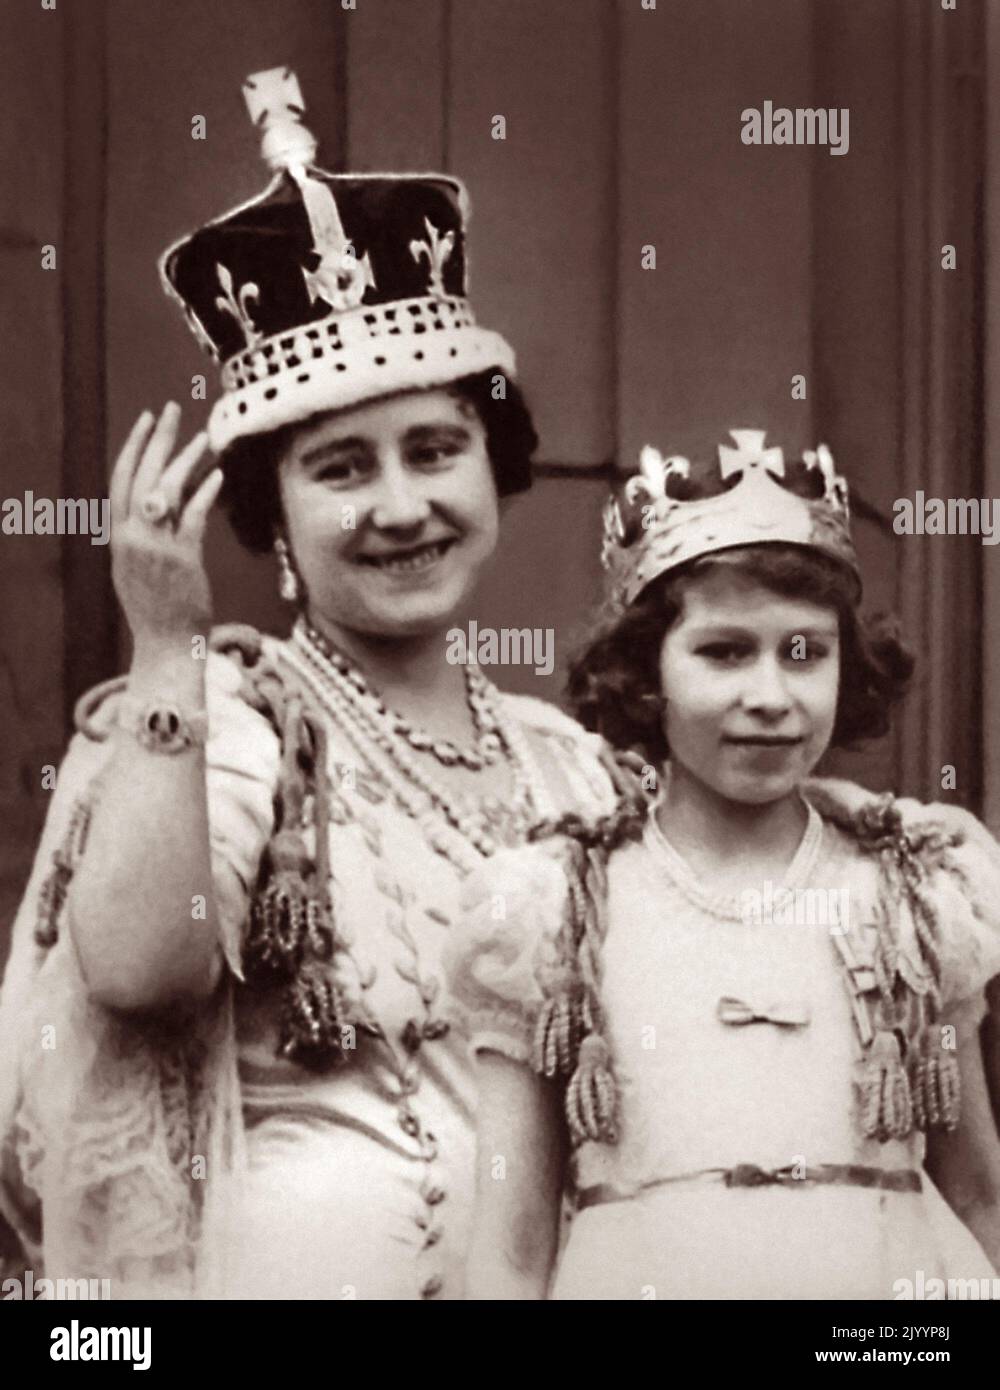 Queen Elizabeth and her eldest daughter Princess Elizabeth (later Queen Elizabeth II) on the balcony of Buckingham Palace after the coronation of King George VI on May 12, 1937. Stock Photo